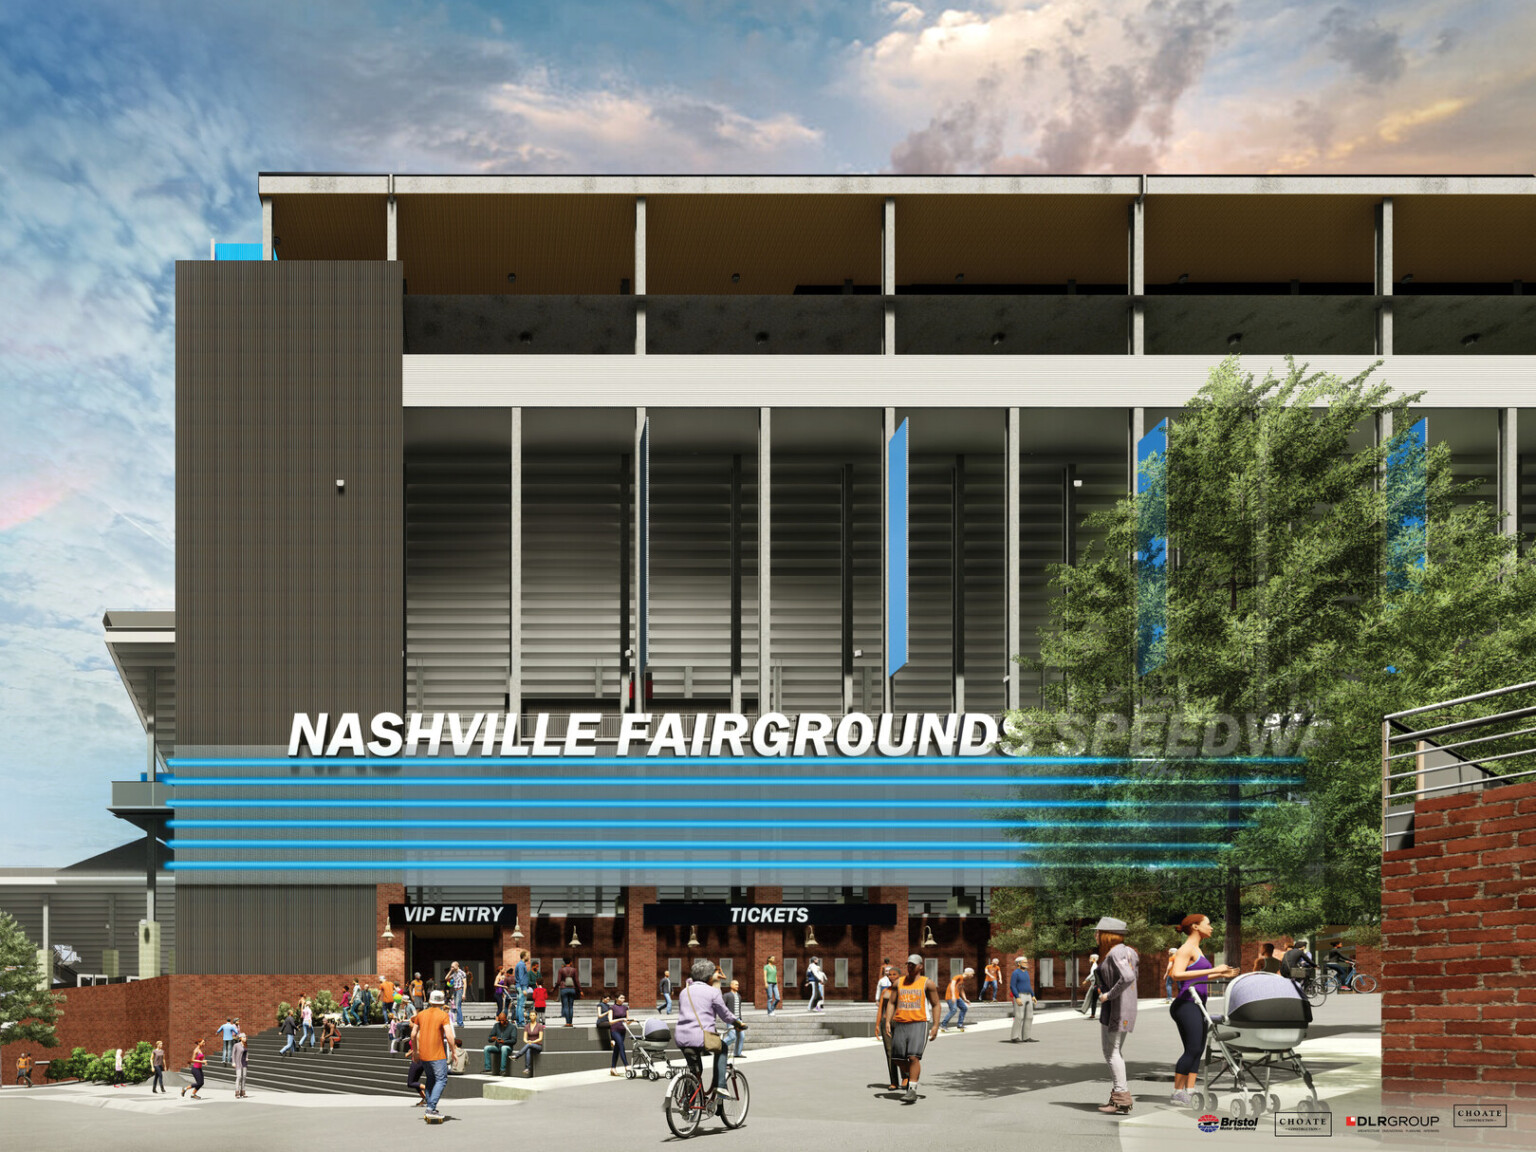 Nashville Fairgrounds Speedway Renovation rendering, black building with blue accents and large windows